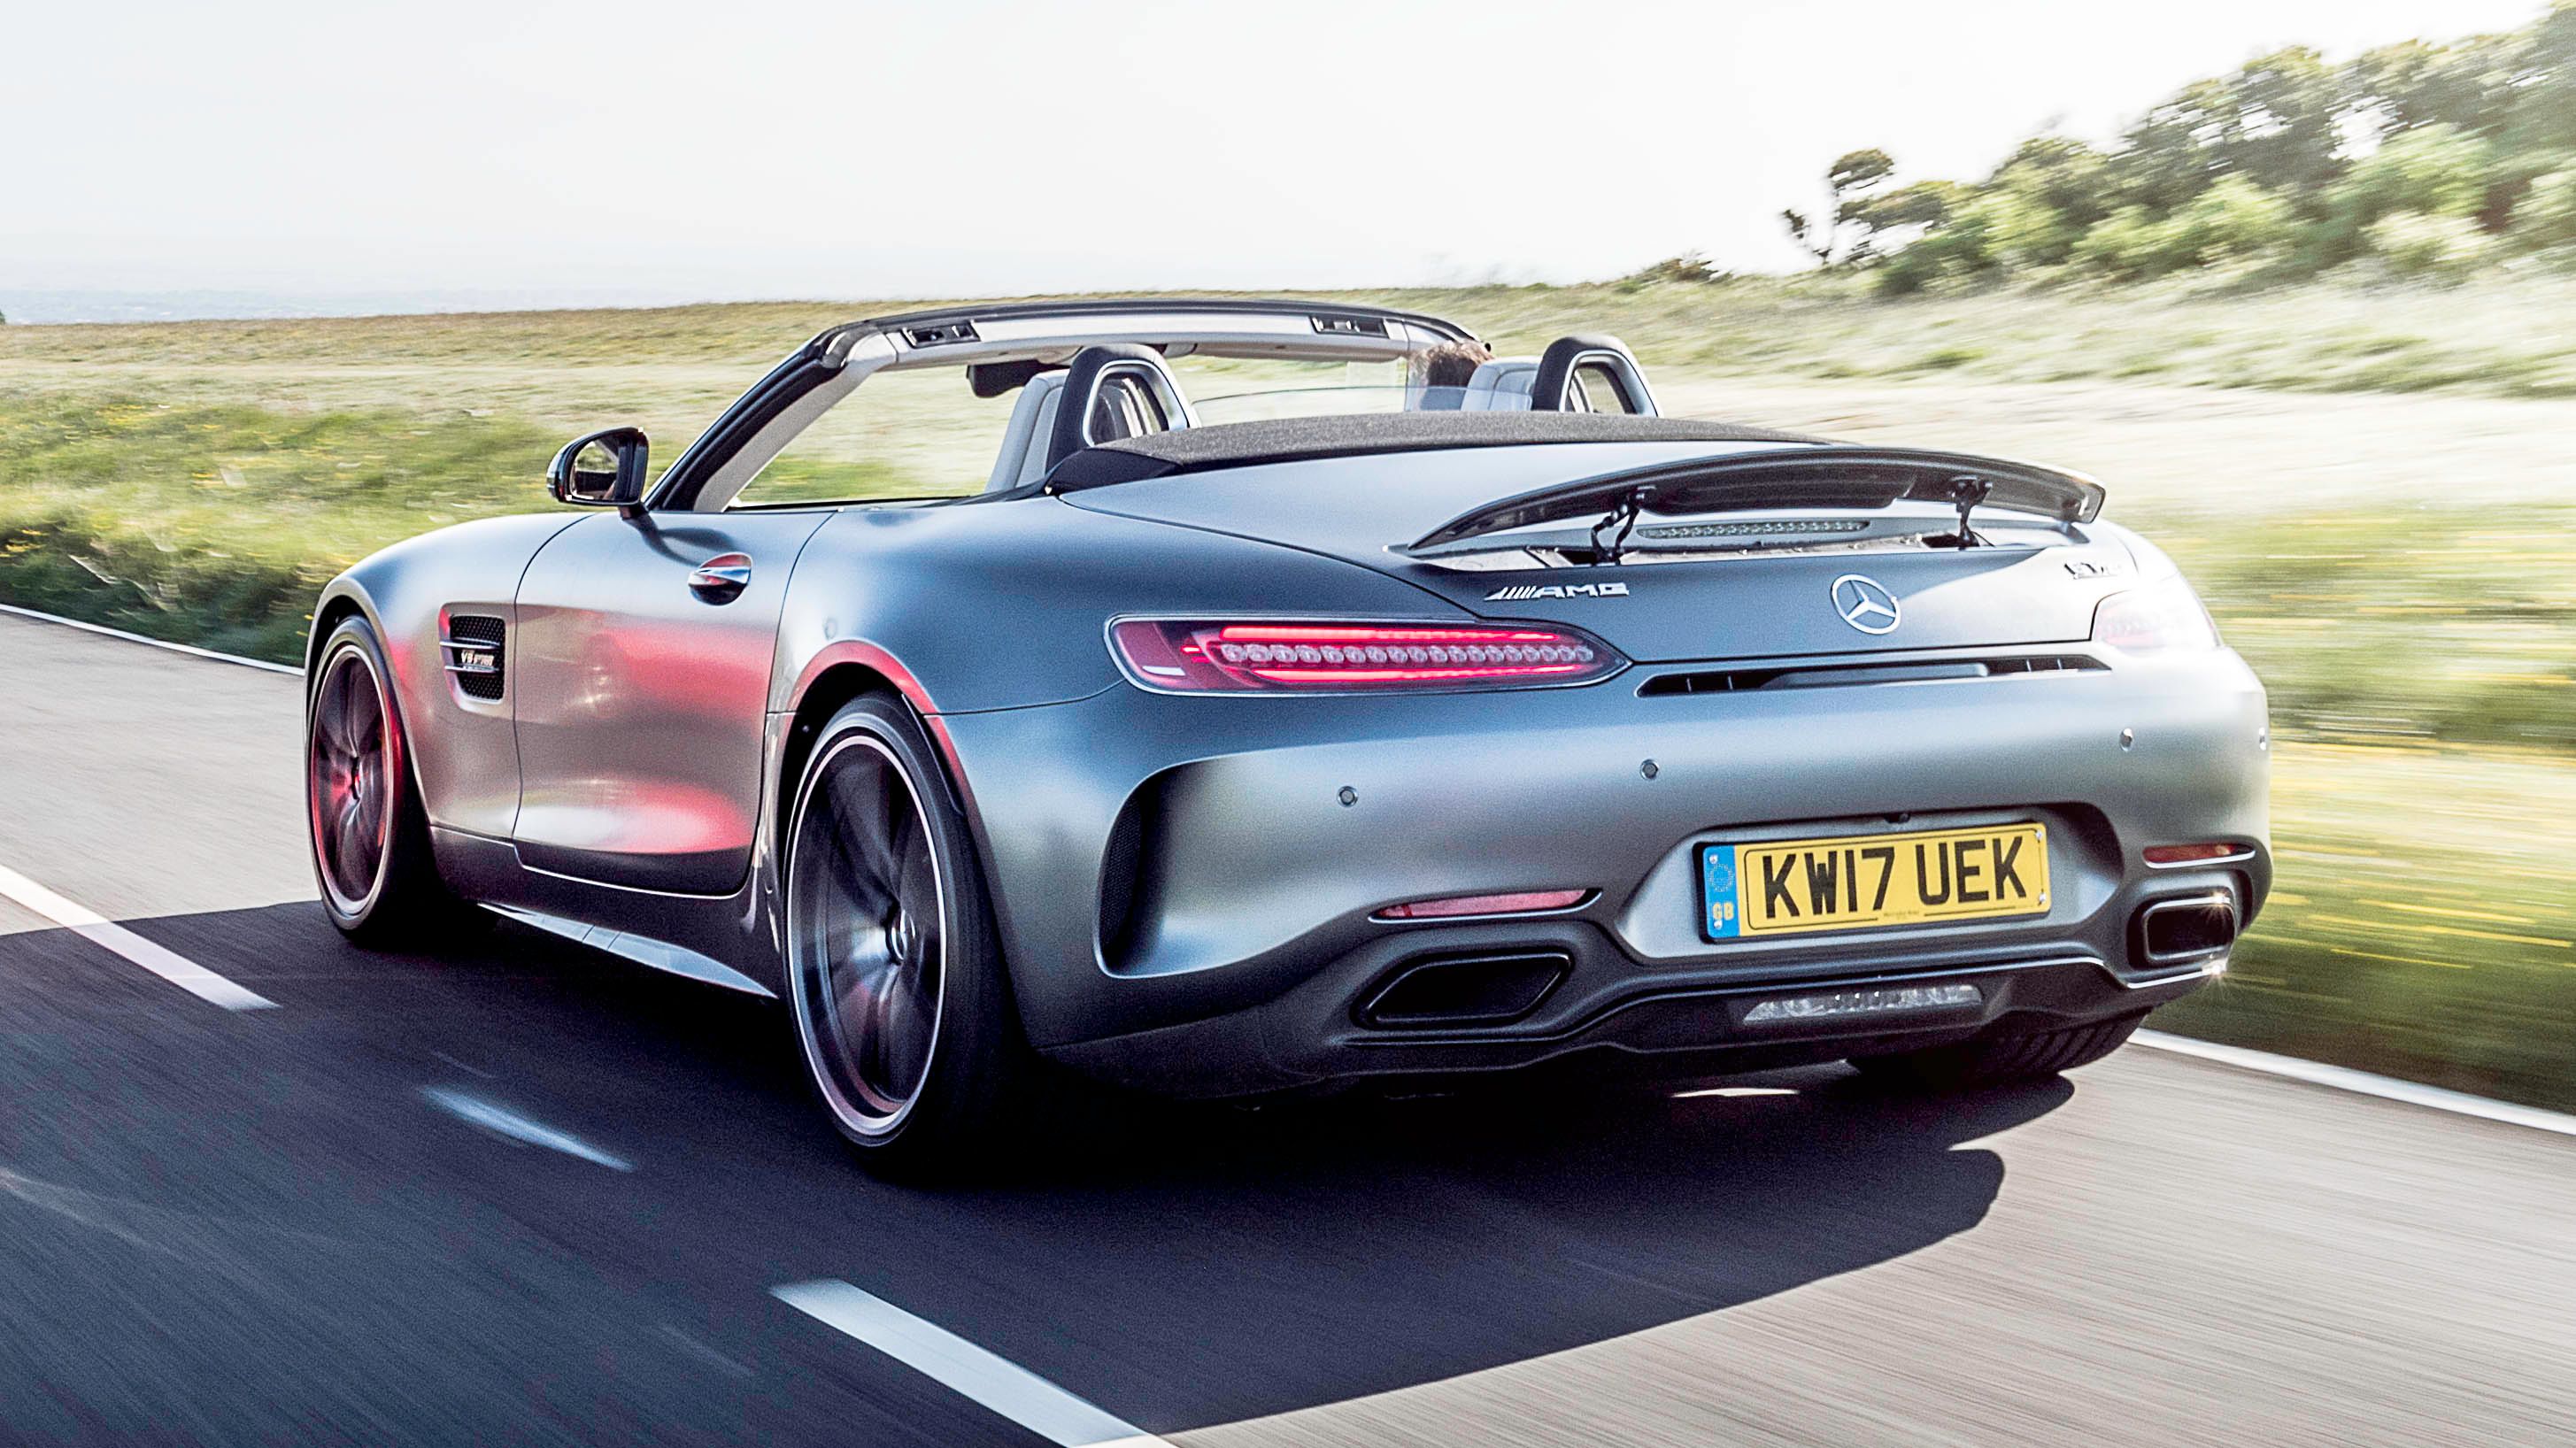 Mercedes-AMG GT C Roadster driving on the road